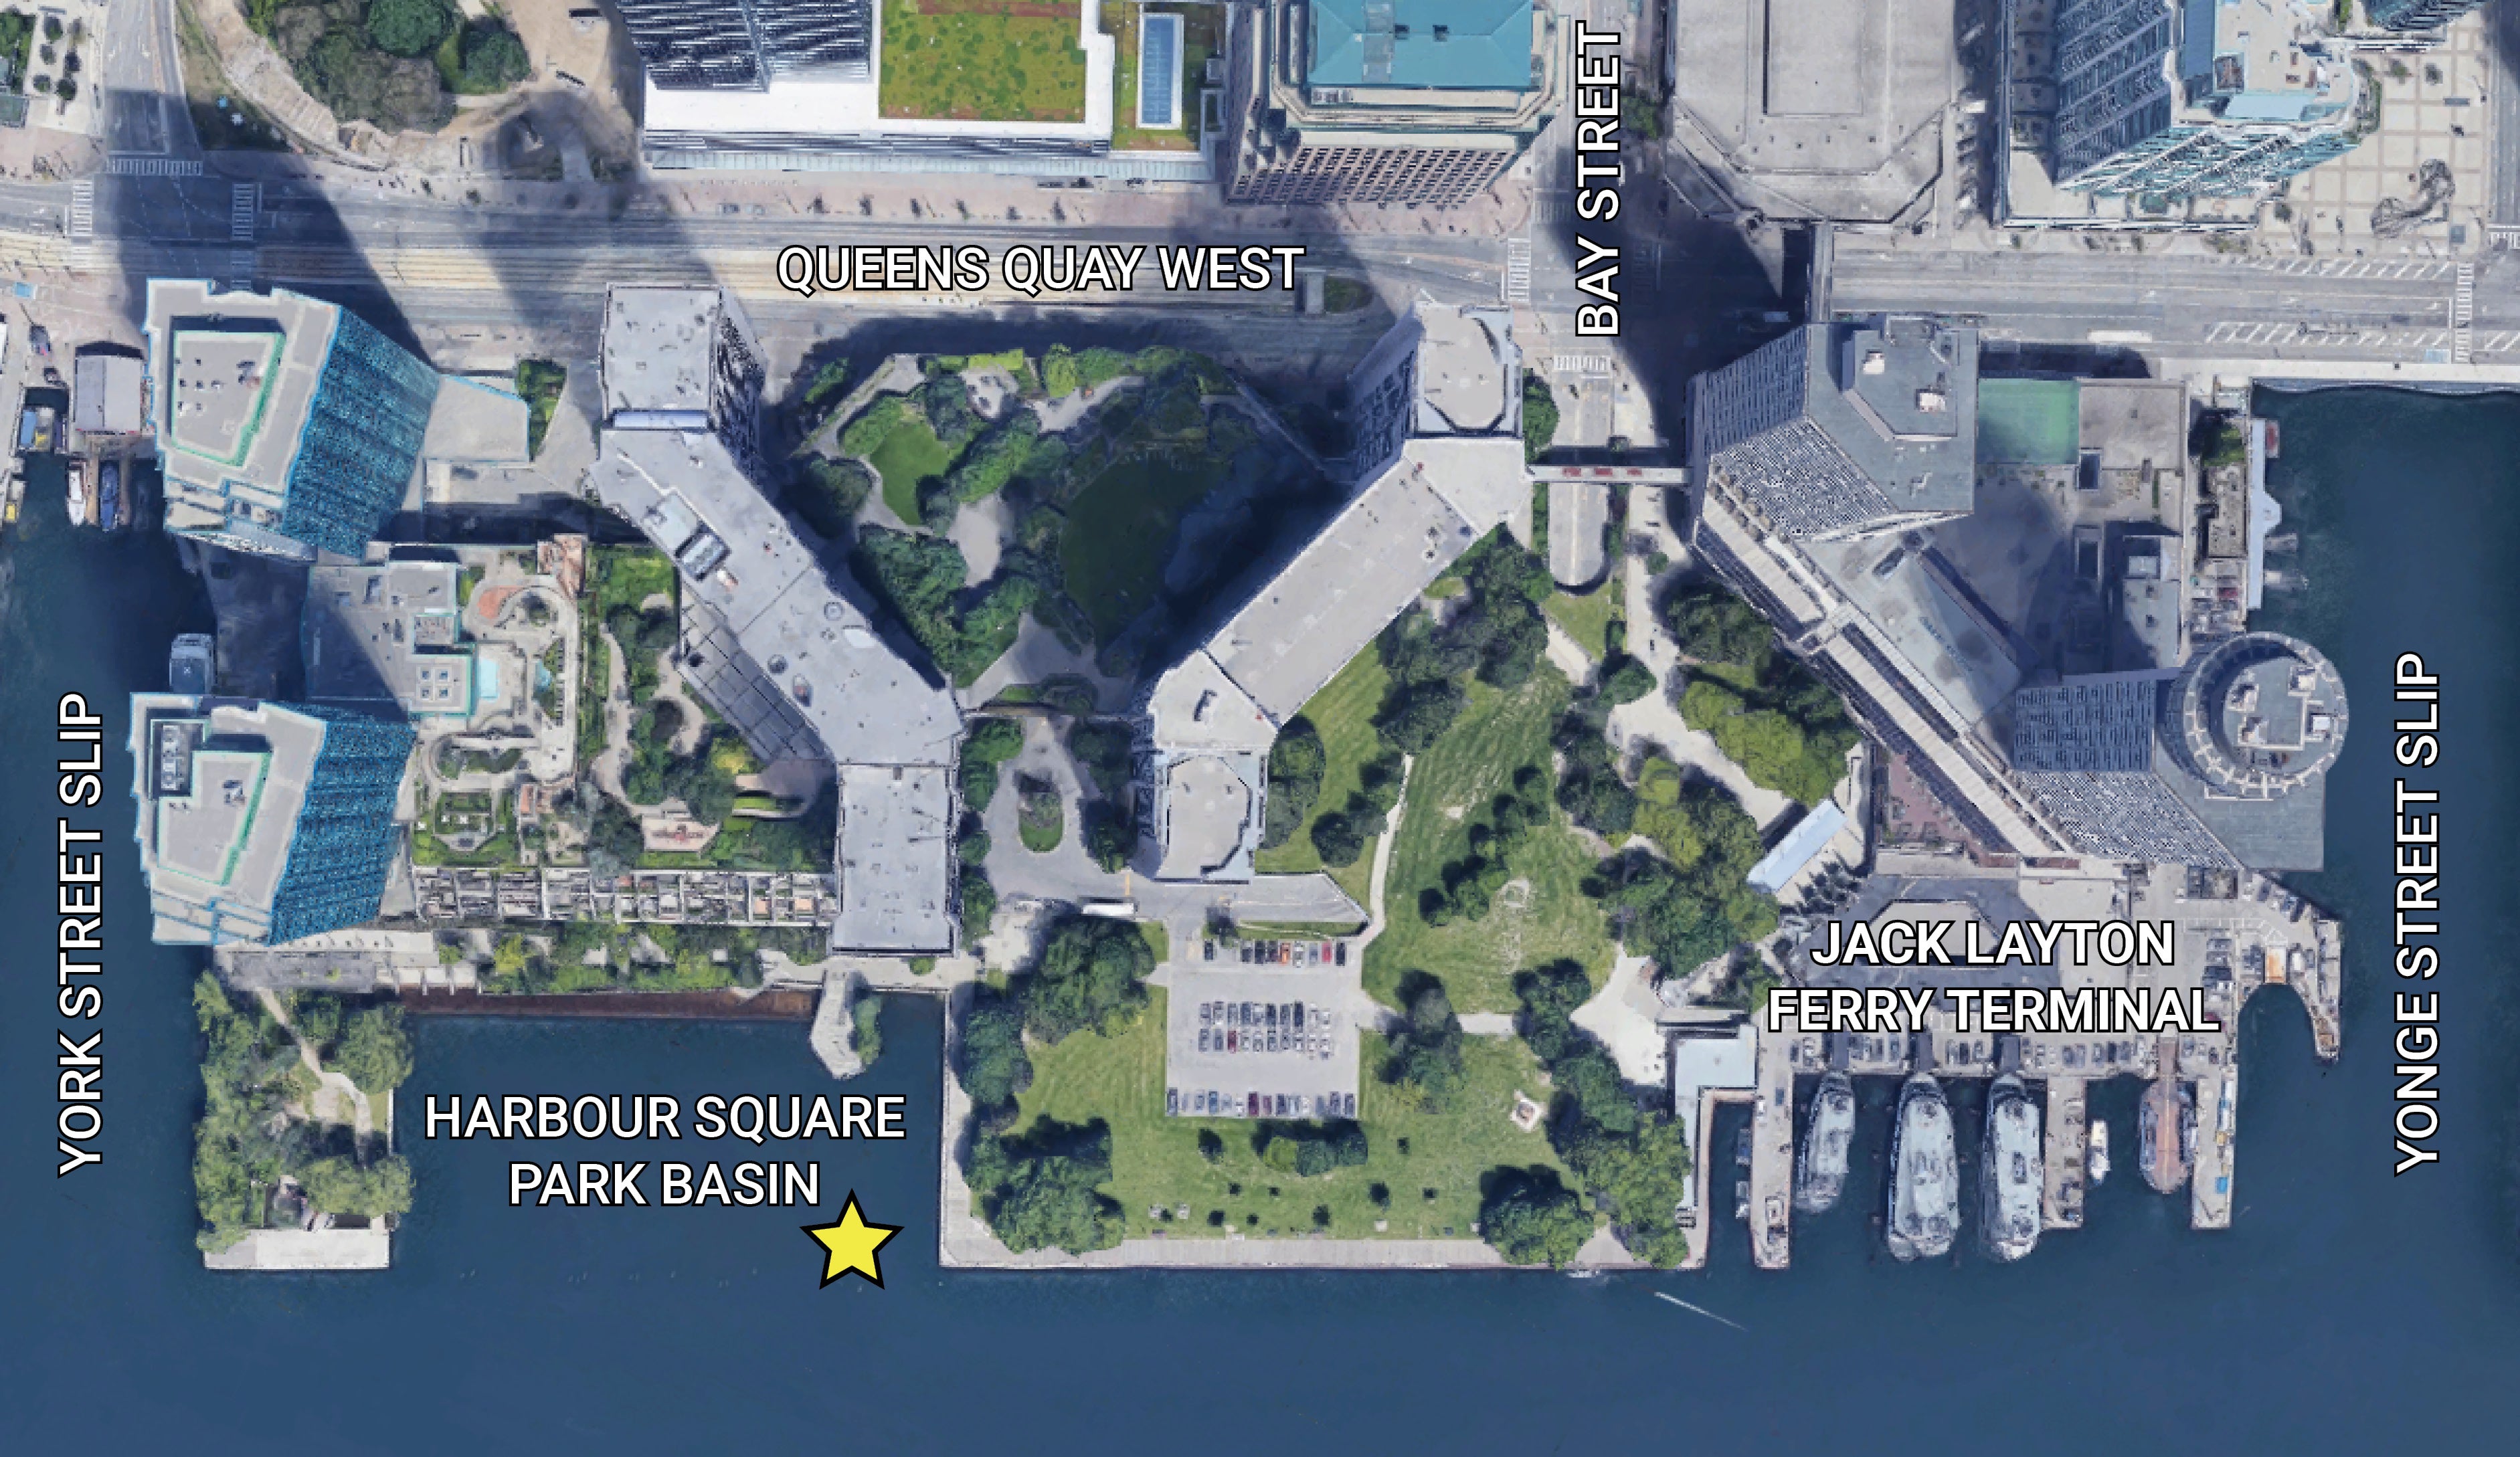 A map with a star denoting the location of the art installation in Harbour Square Park.